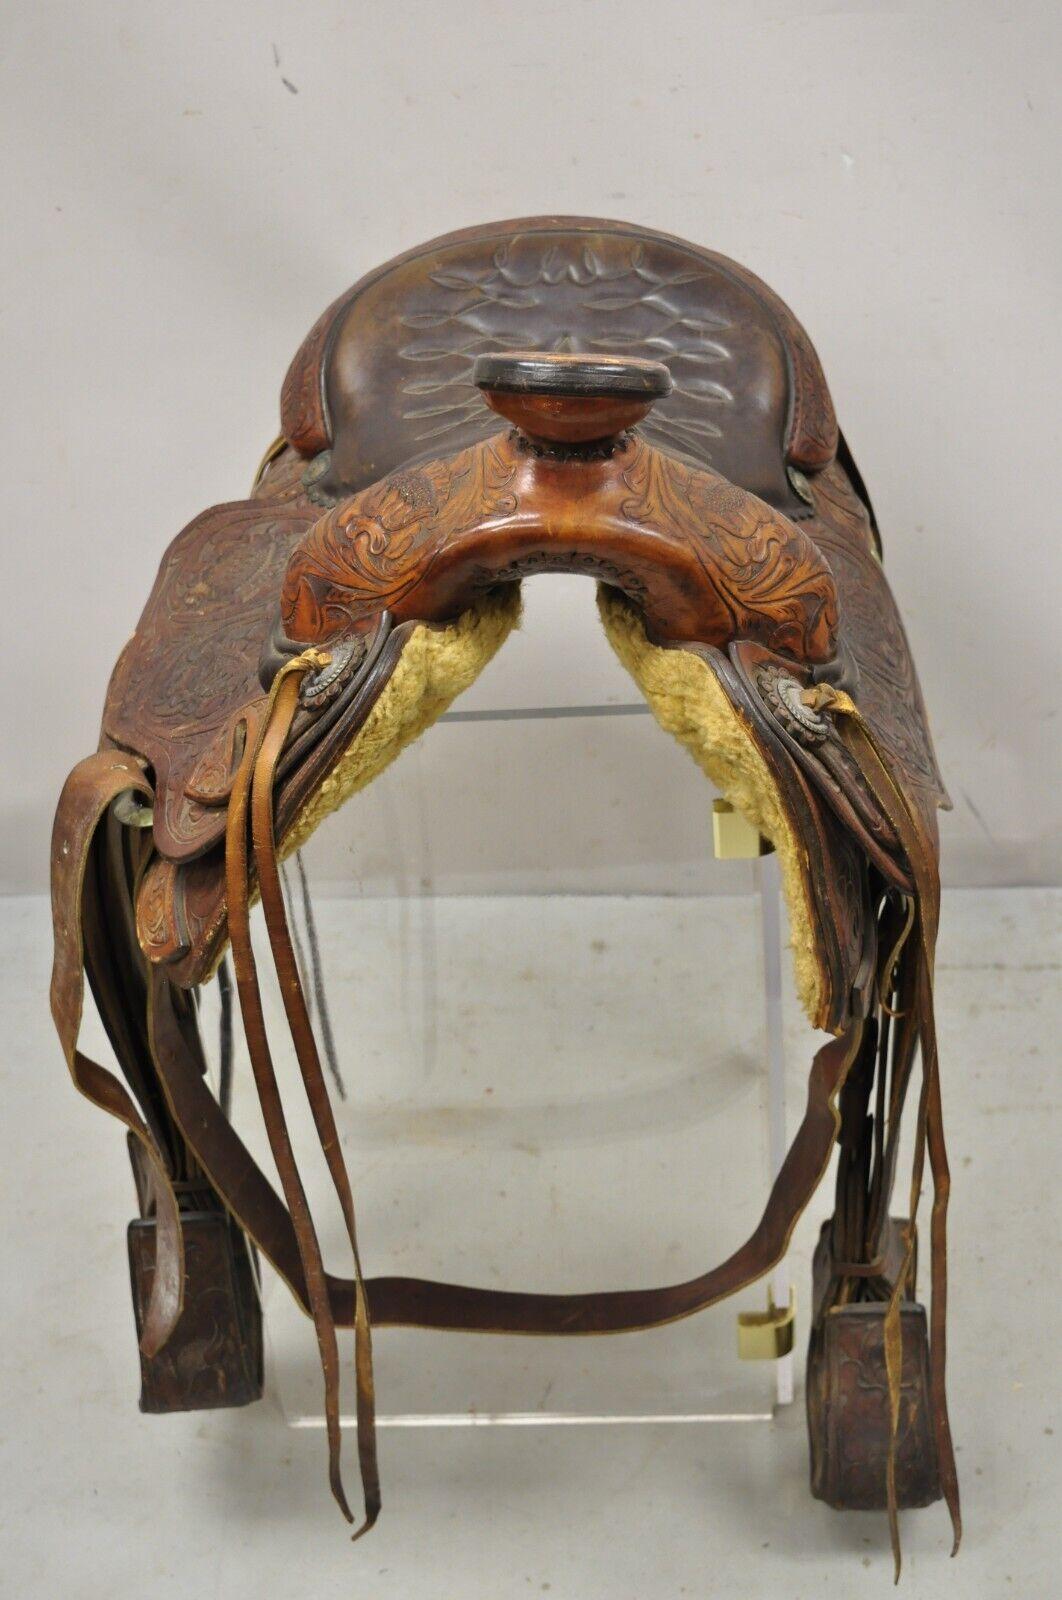 Vintage ML Leddy's Brown Tooled Leather Western Show Horse Saddle. Item features full tooled leather floral detail, original maker stamp, quality American craftsmanship. Circa Mid to late 20th Century. Measurements: 16